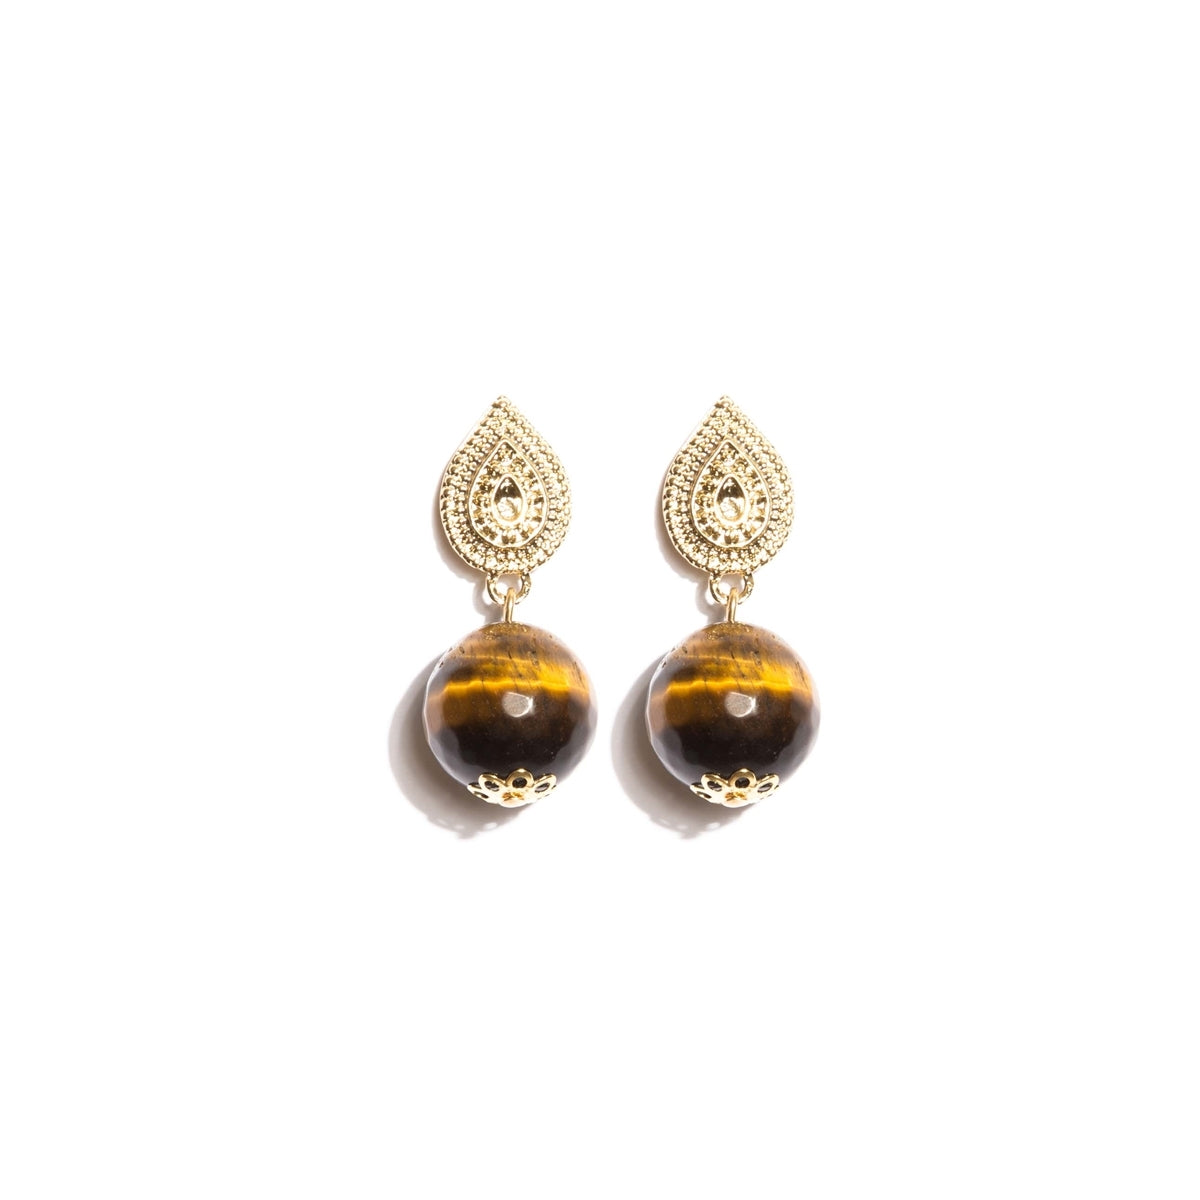 sphere earring made of tiger eye natural stone, gold-plated